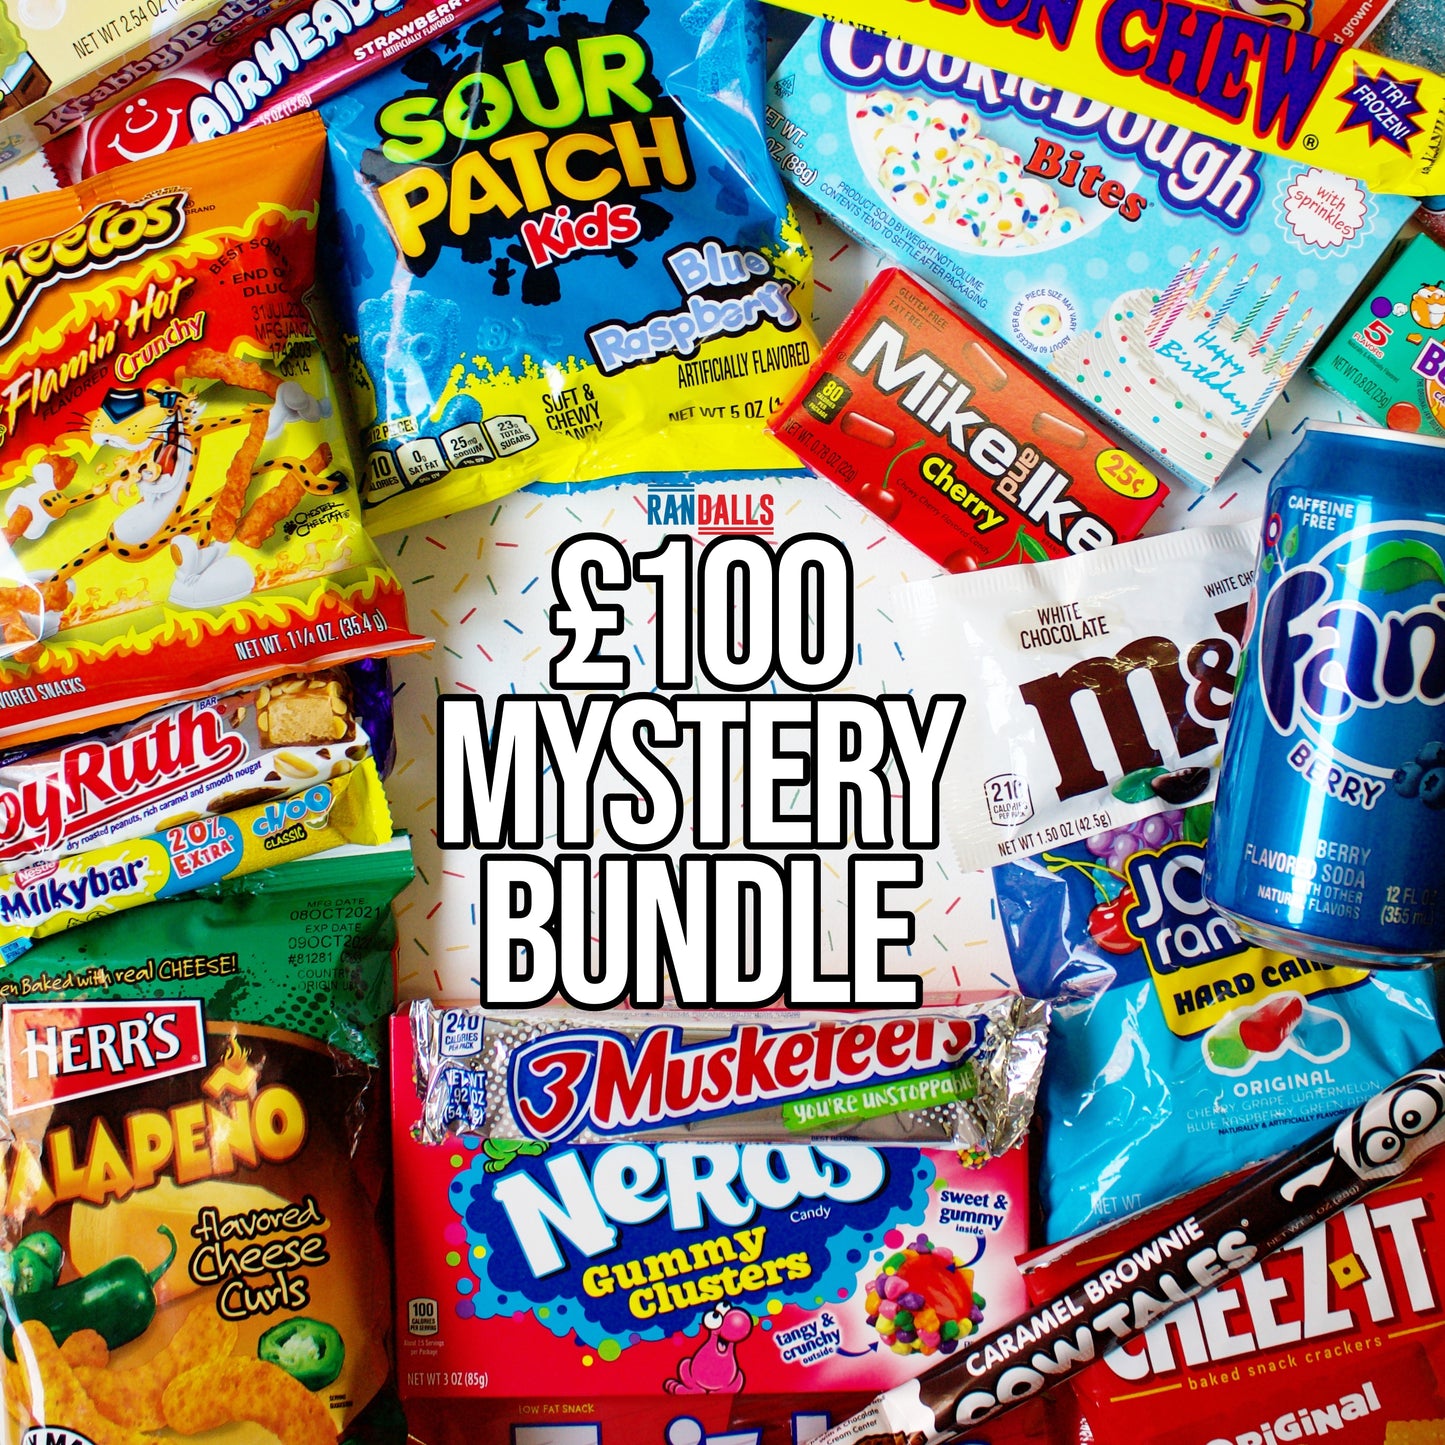 £100 mystery bundle, candy, sweets, chocolate, lollipop, soda, pop, drink, fizzy, crisps, chips, cheese puffs, gift, giftbox, cheetos, sour patch kids, blue raspberry, cookie dough, mike and ike, cherry, m&ms, white chocolate, jolly ranchers, cow tales, brownie, nerds, 3 musketeers, herrs, jalapeno, baby ruth, milkybar choo